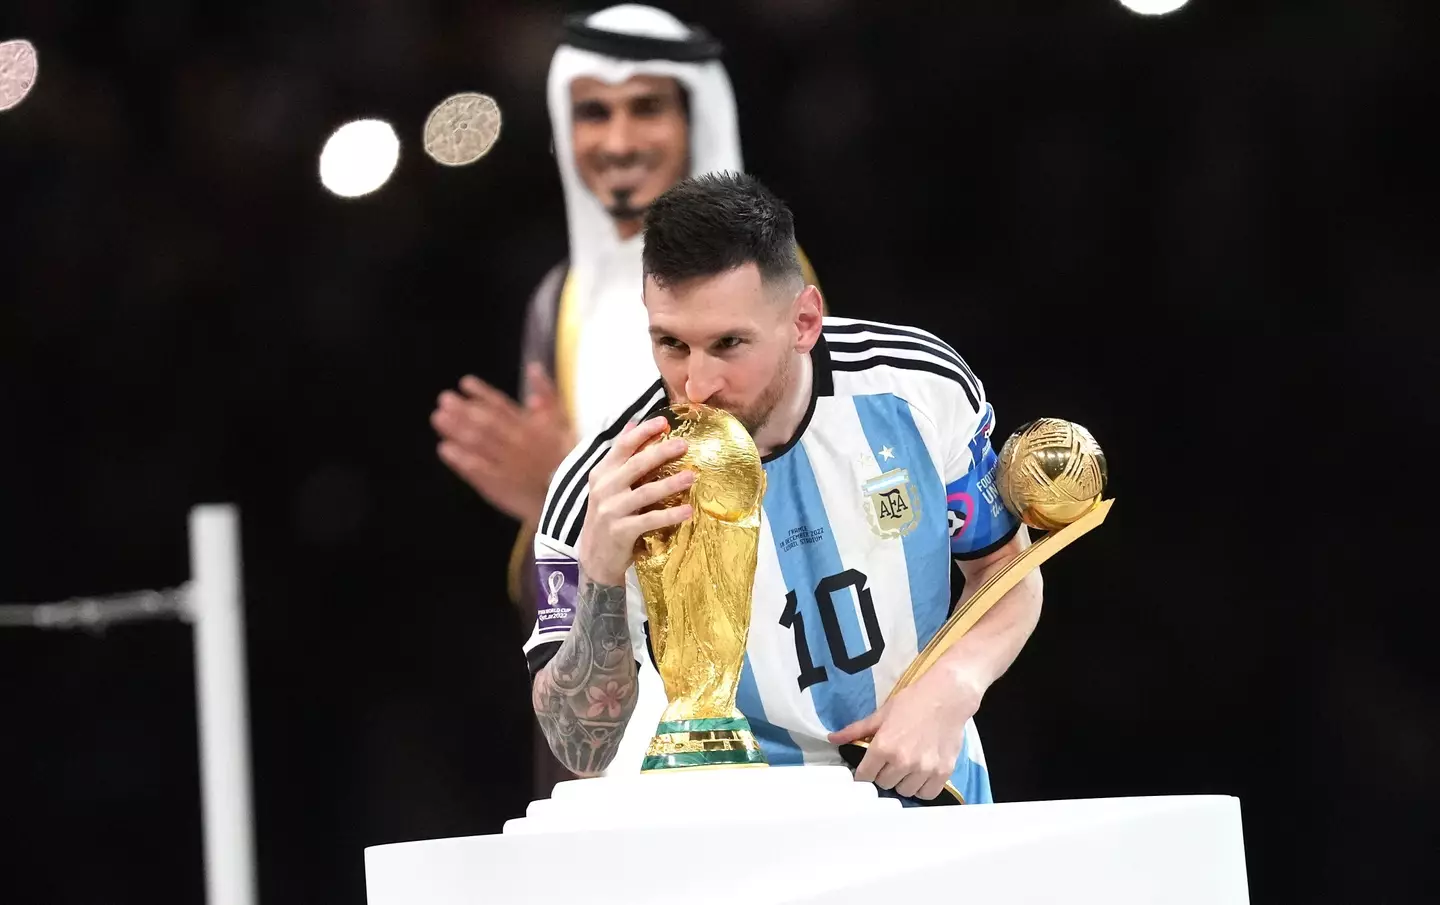 Messi with the World Cup trophy. (Image